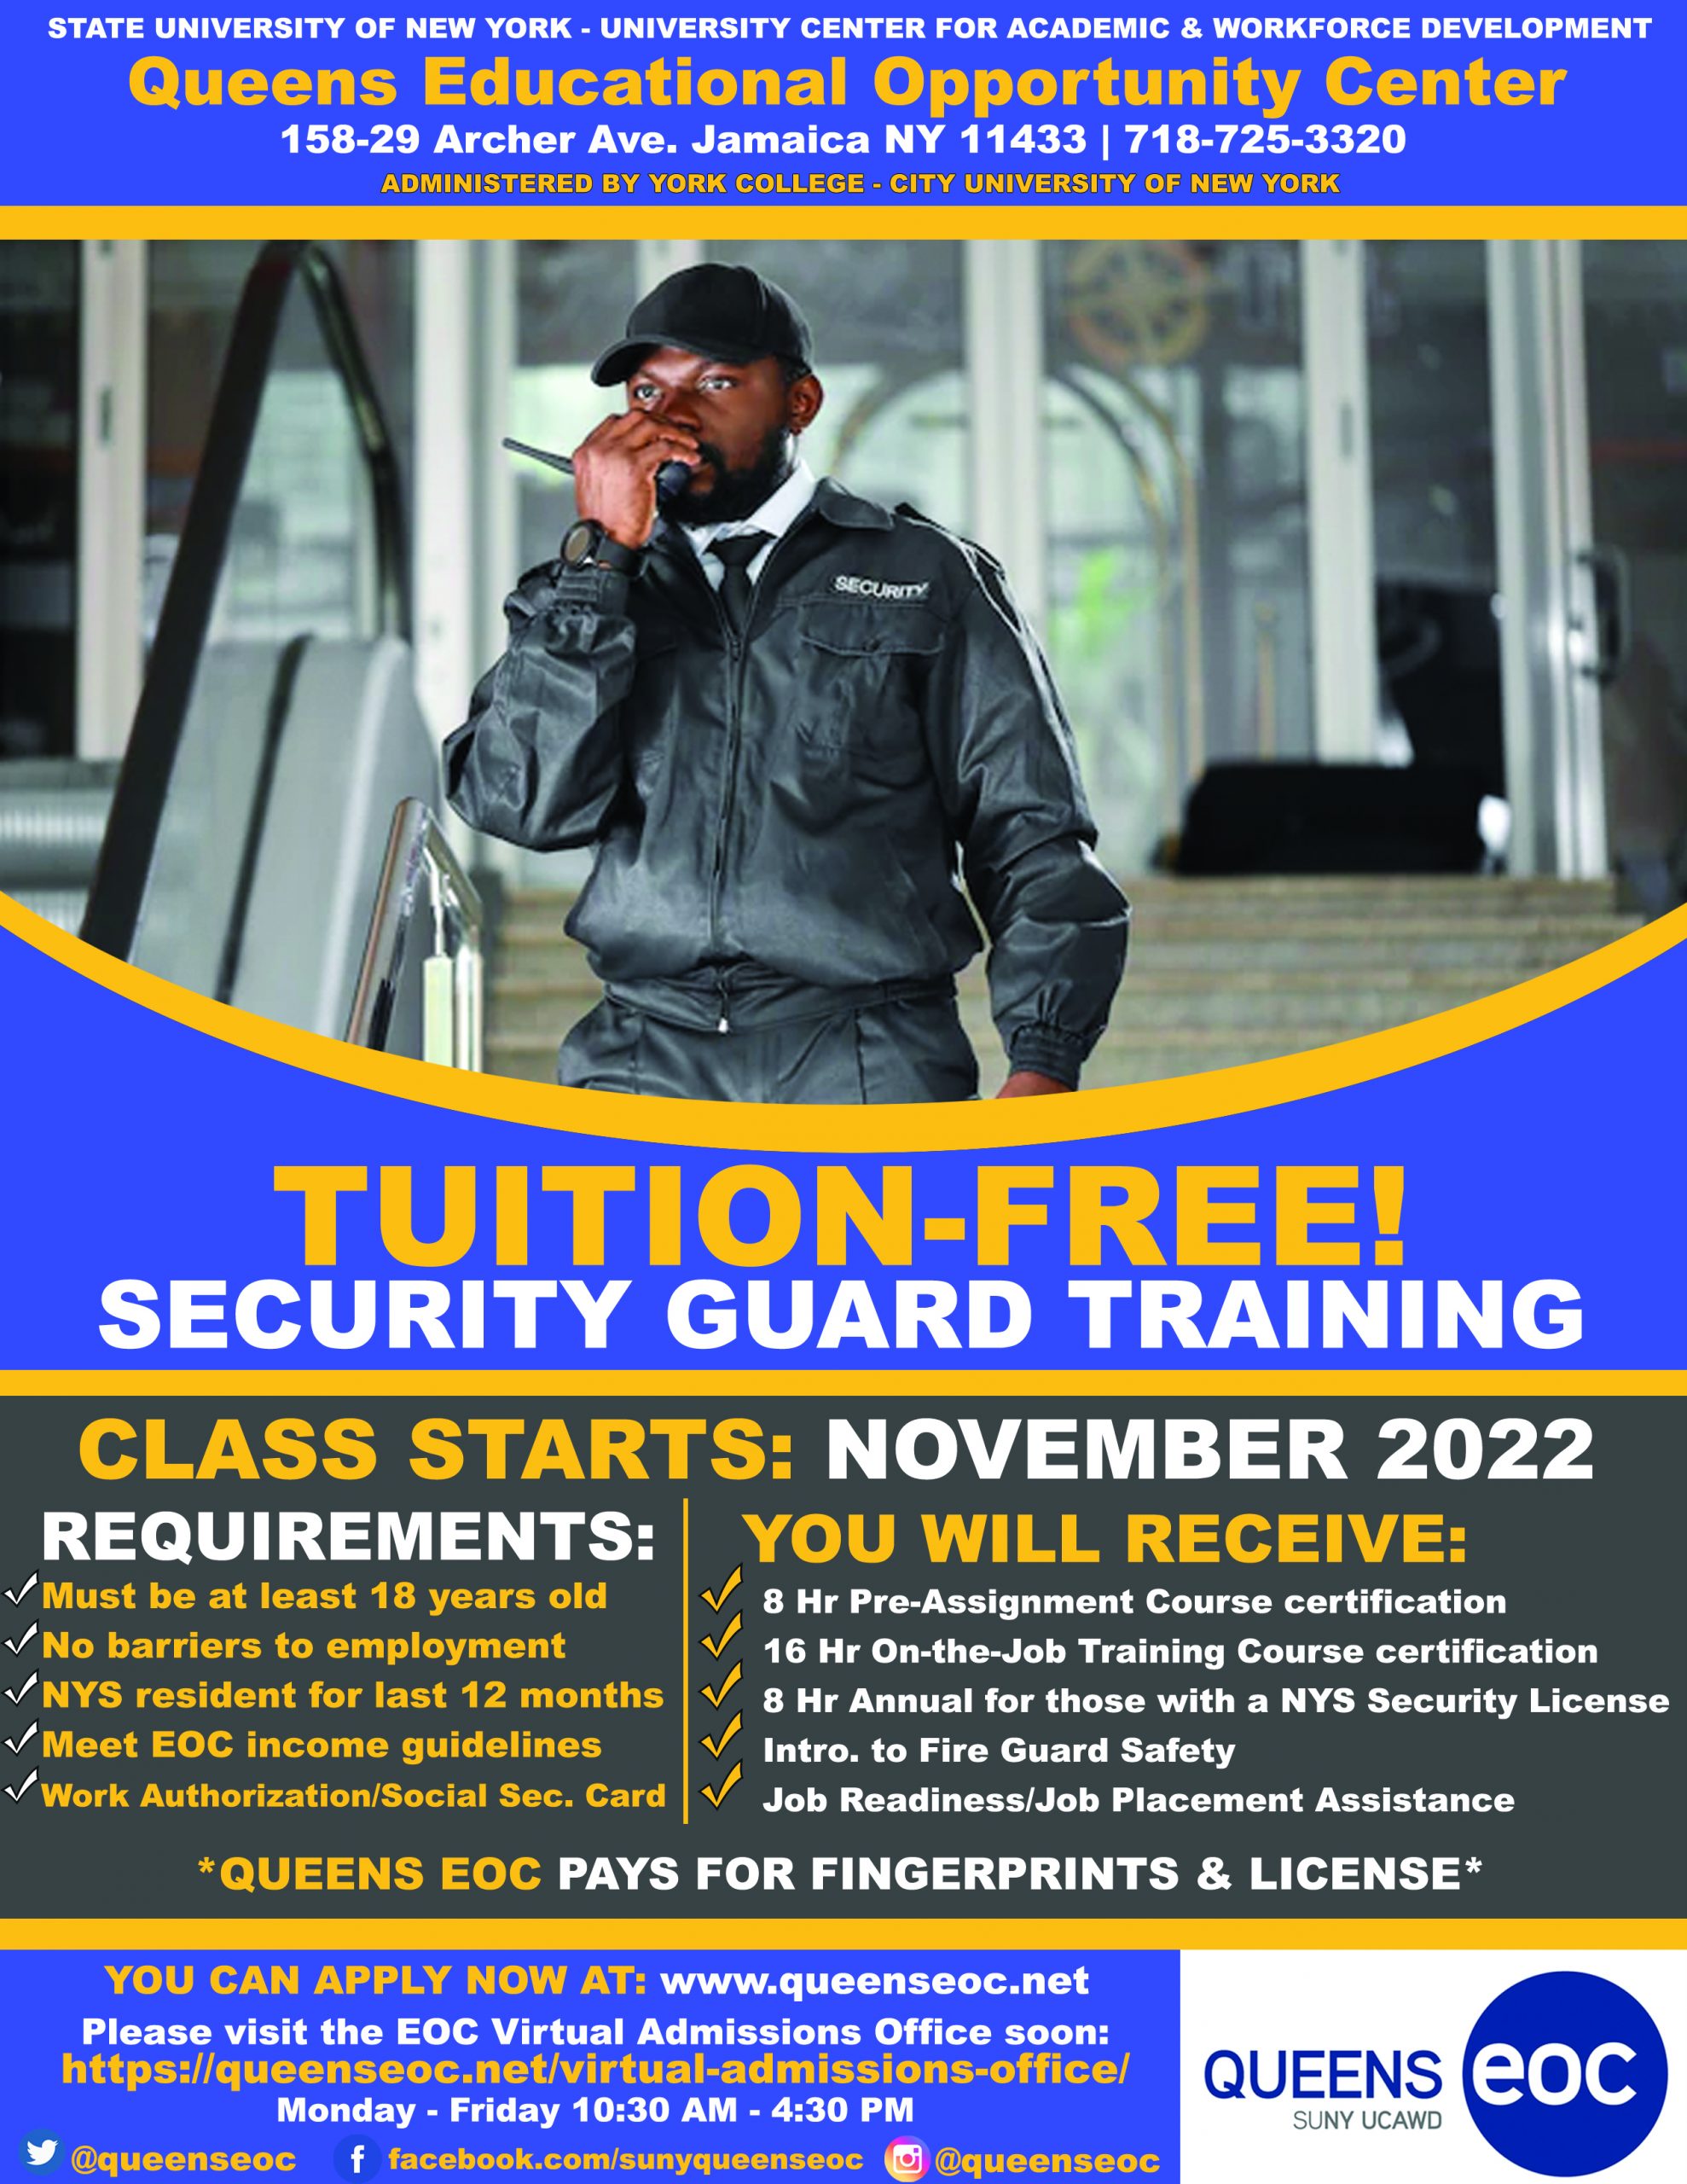 SECURITY GUARD TRAINING TUITIONFREE CLASS STARTS NOVEMBER 2022